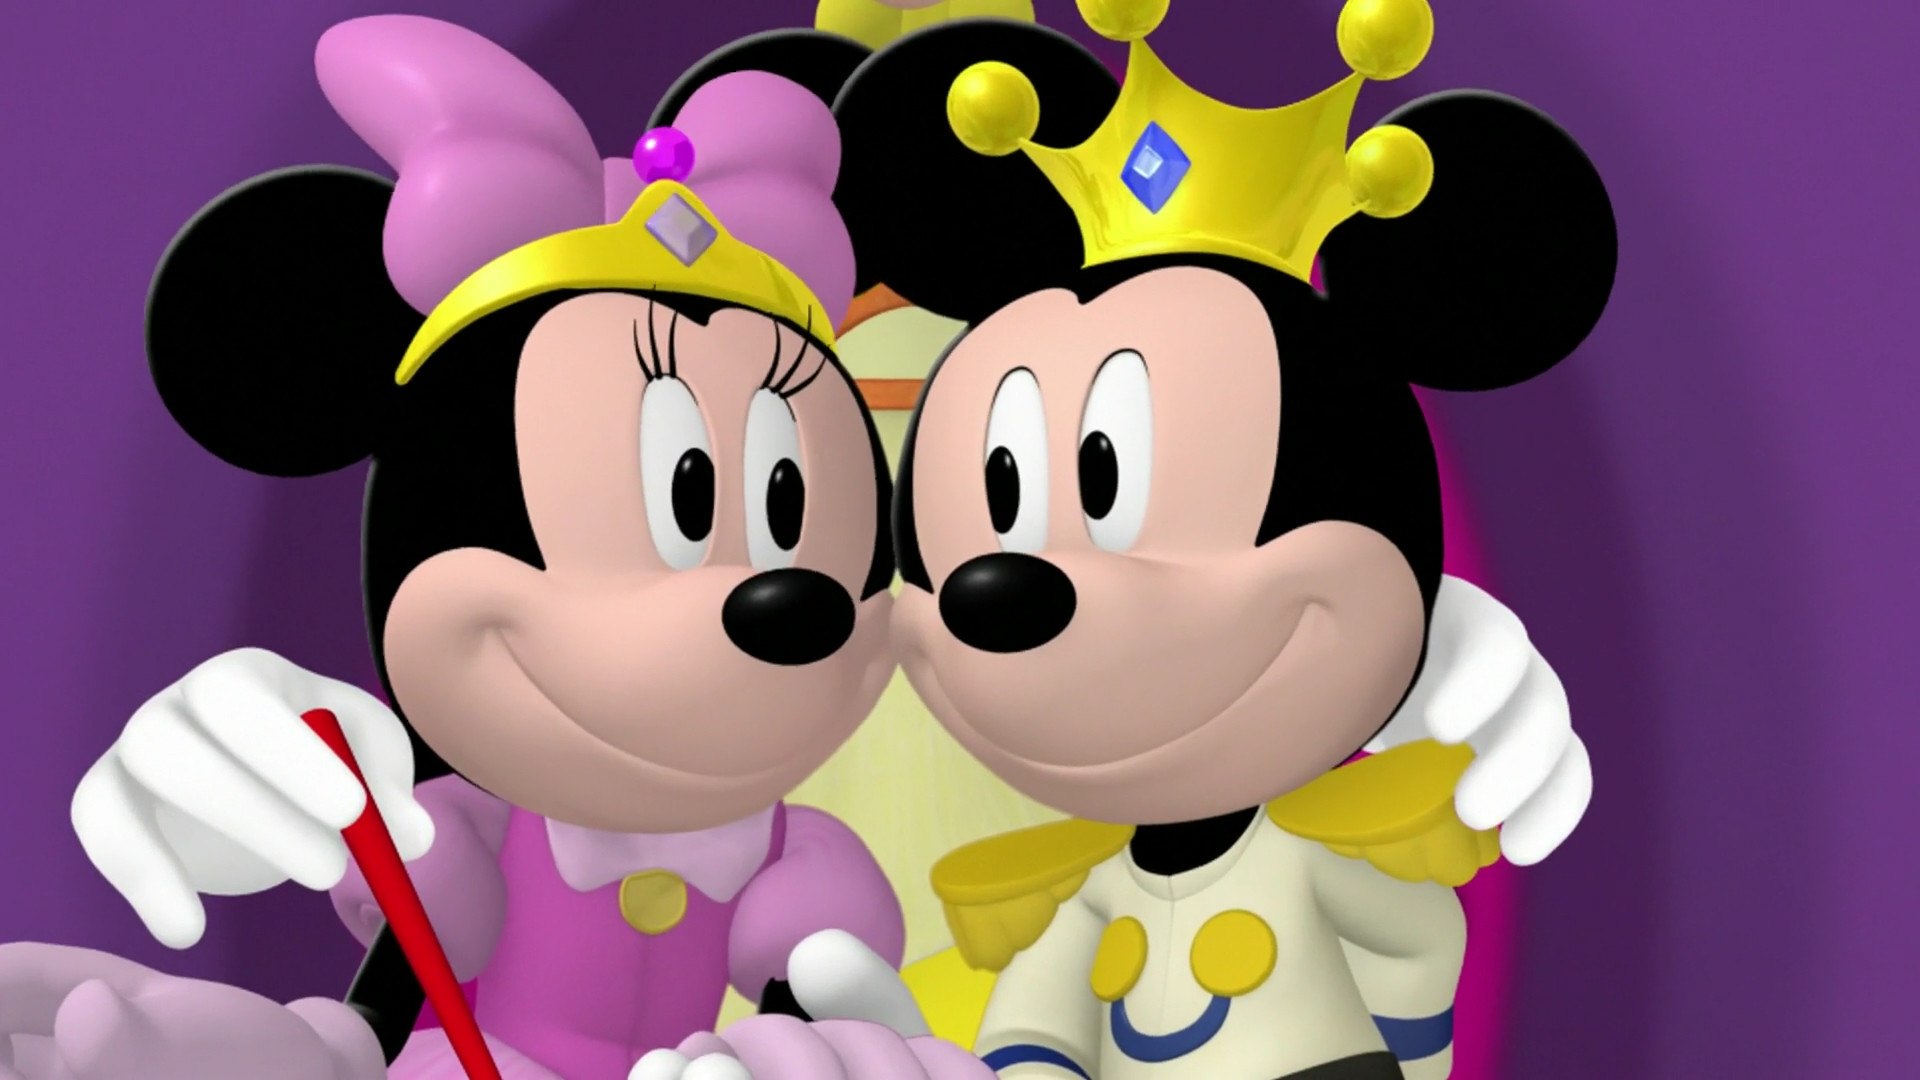 1920x1080 Mickey Mouse Clubhouse images Minnie-rella (Prince Mickey and Pri...